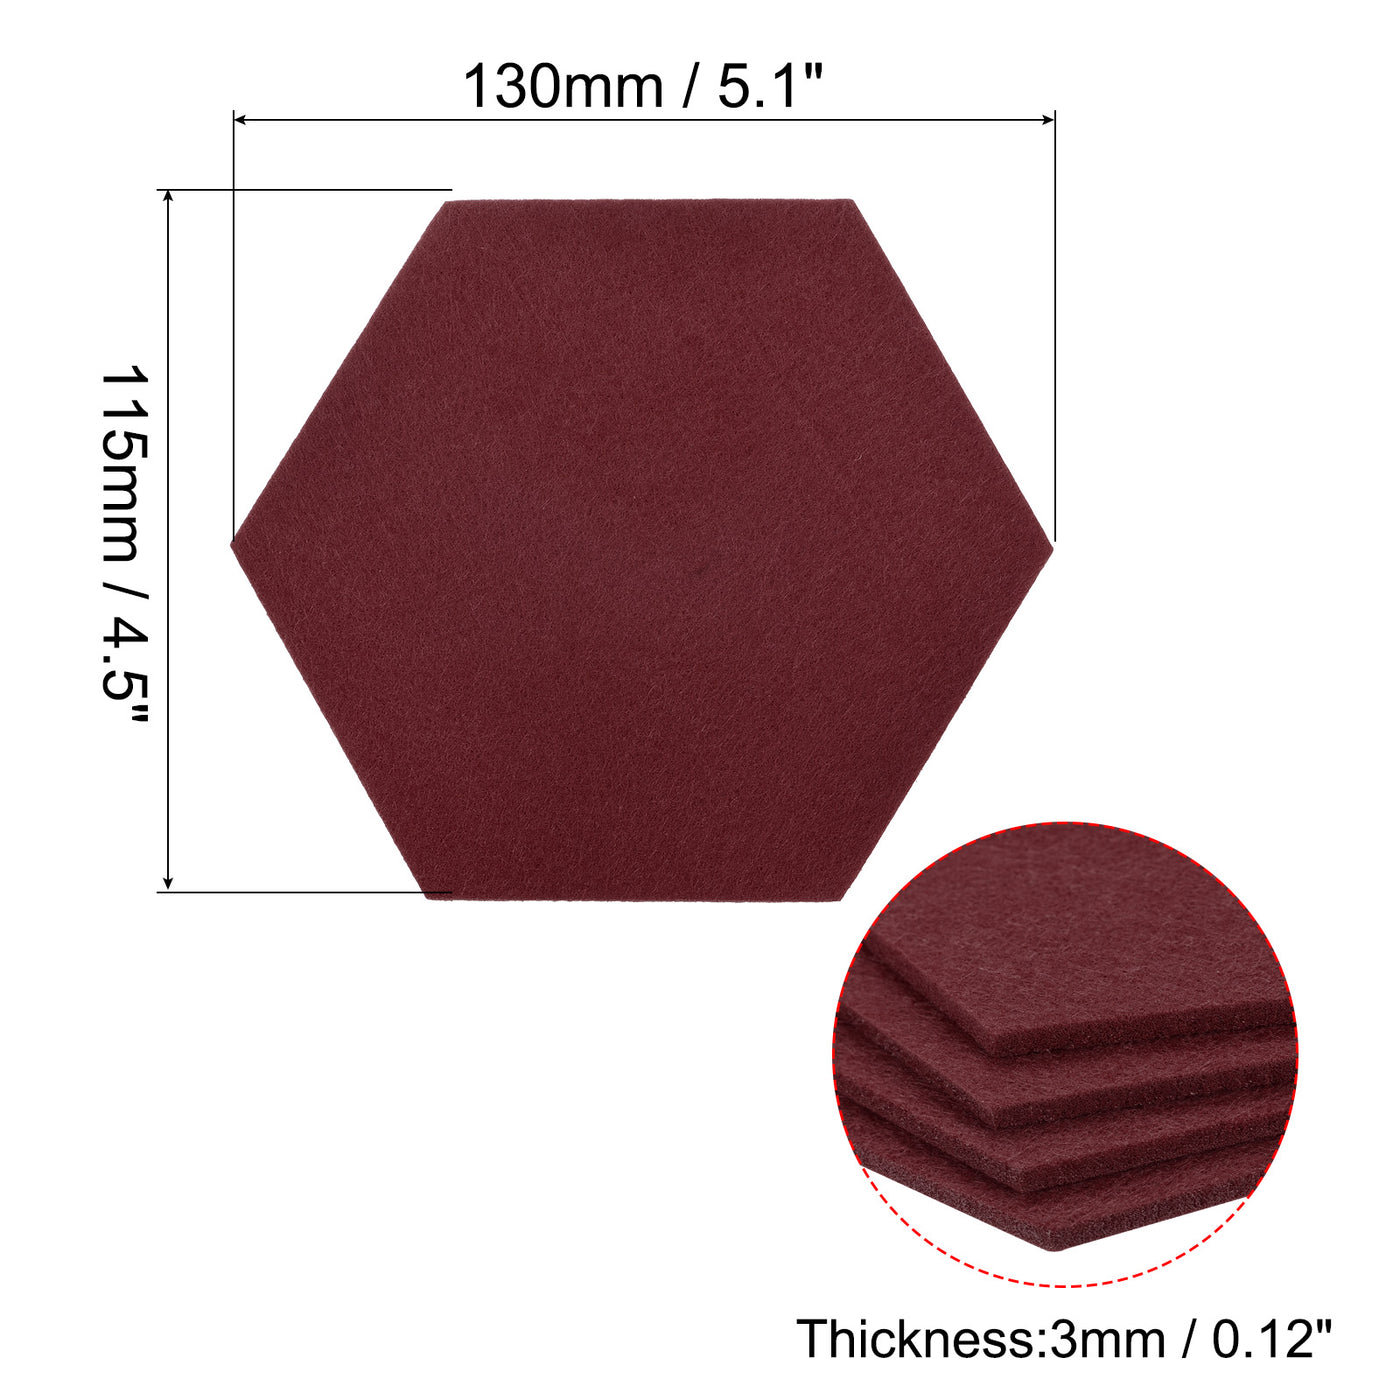 uxcell Uxcell Felt Coasters 9pcs Absorbent Pad Coaster for Drink Cup Pot Bowl Vase Wine Red